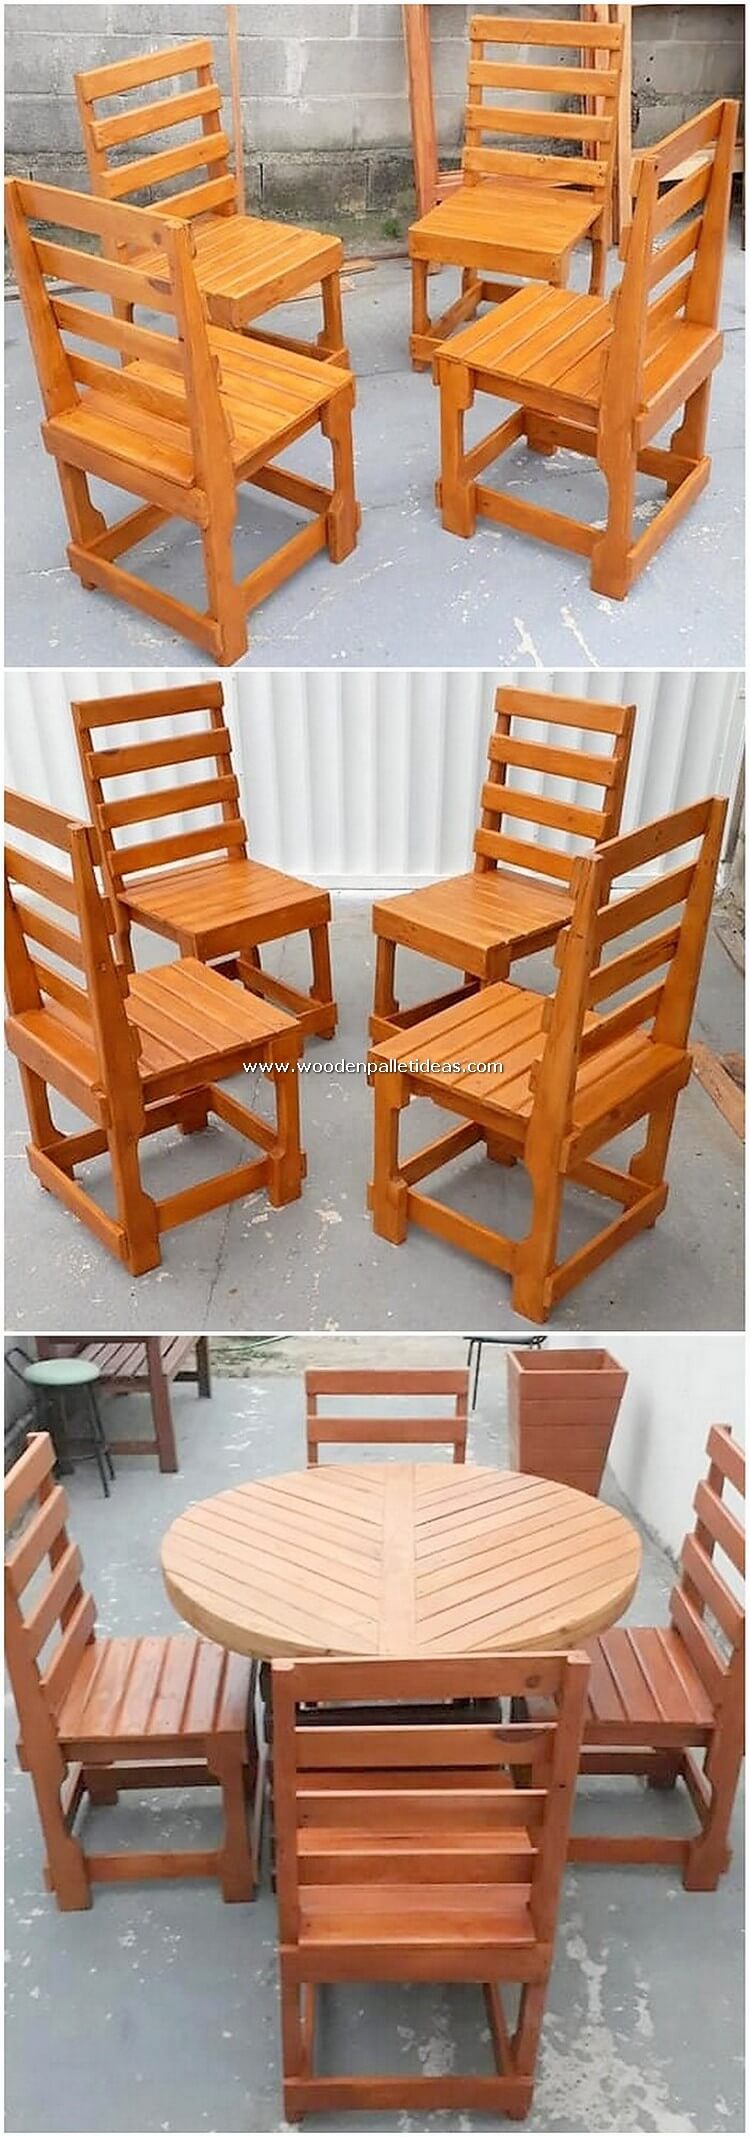 Pallet-Chairs-and-Table